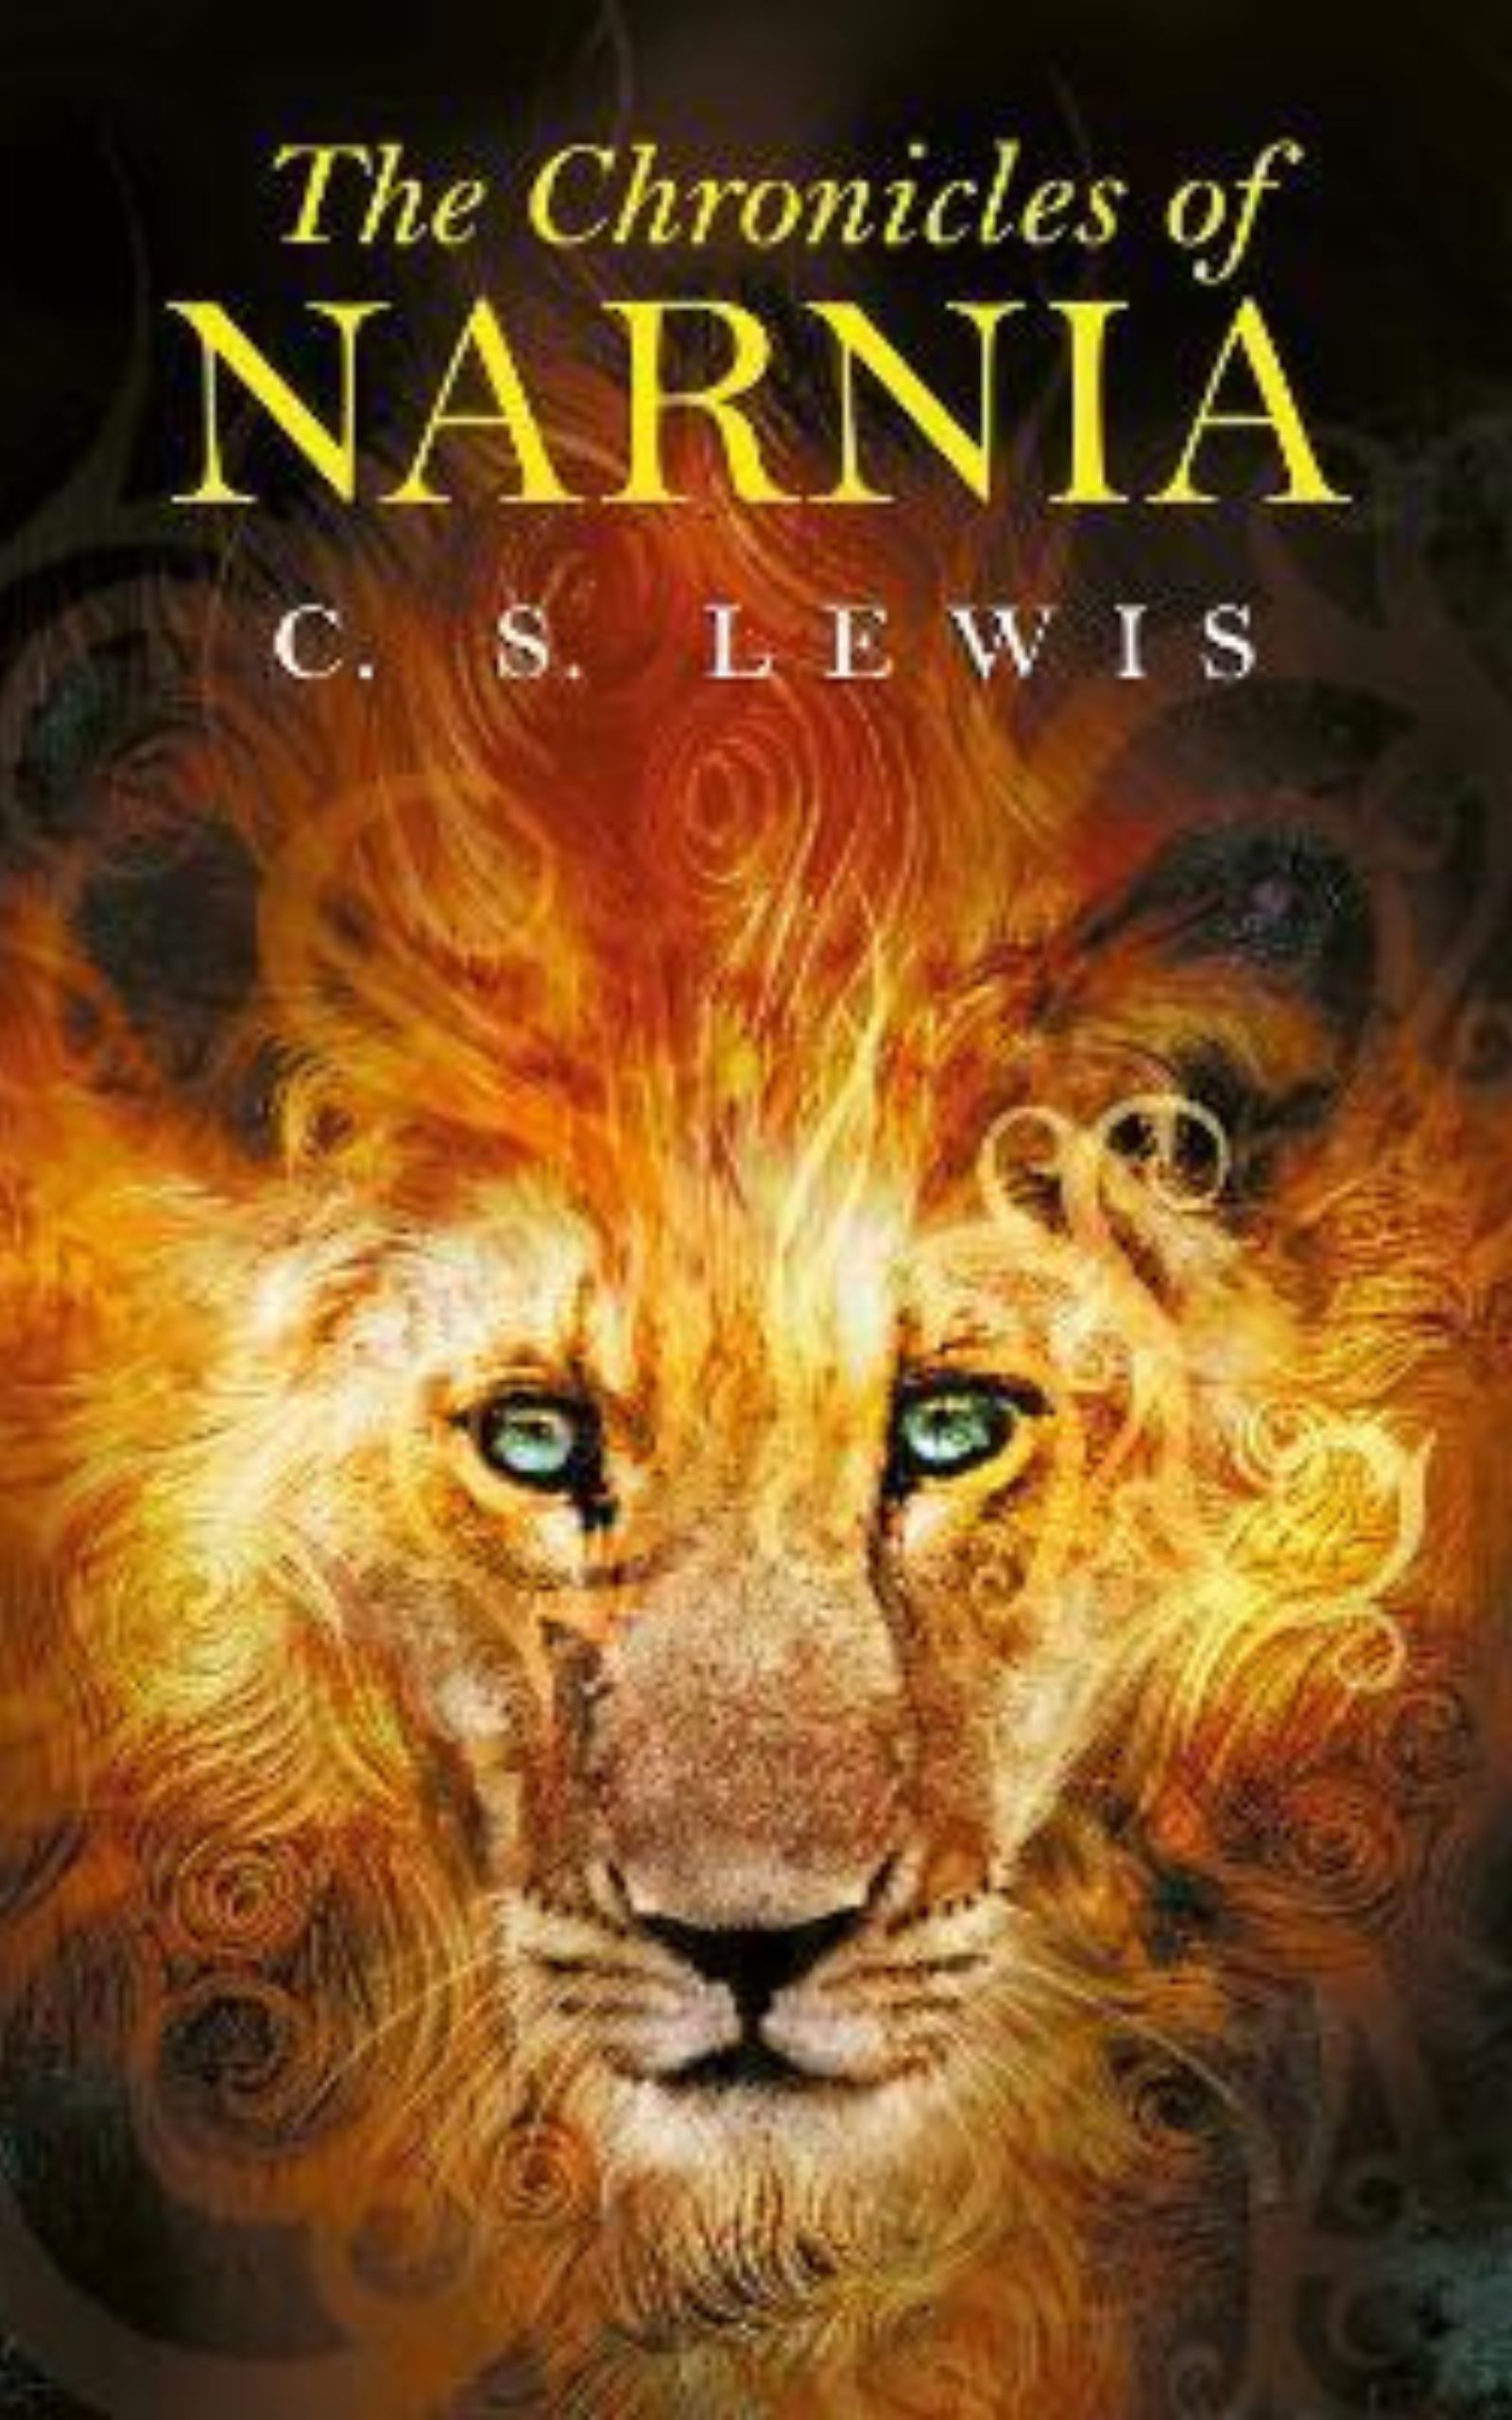 The Chronicles of Narnia by C.S. Lewis.